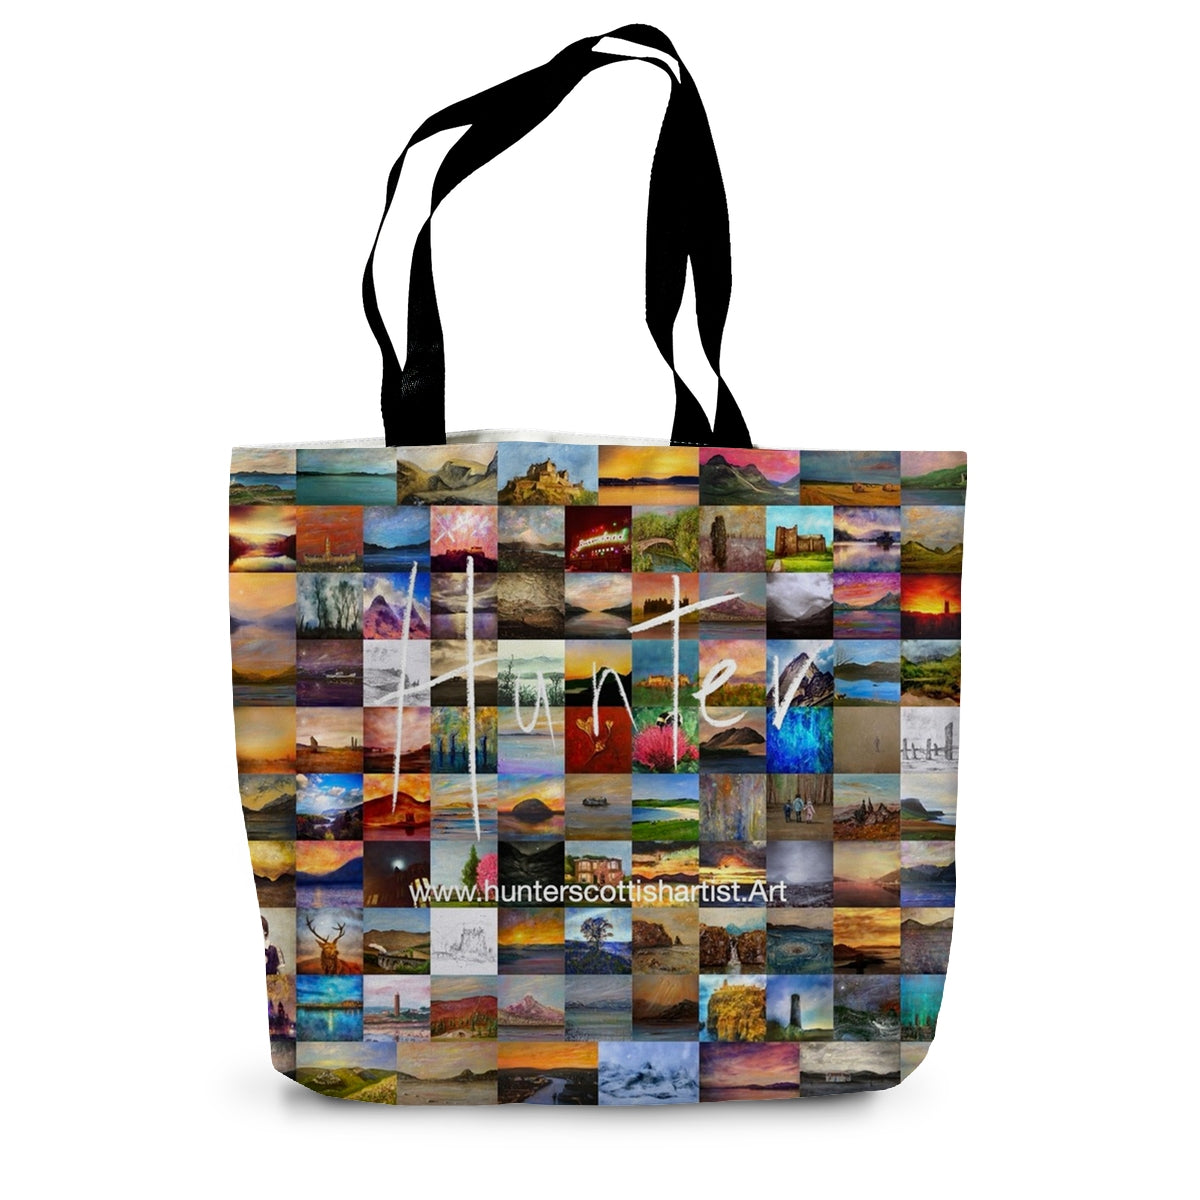 Cloch Lighthouse Dawn Art Gifts Canvas Tote Bag-Bags-River Clyde Art Gallery-14"x18.5"-Paintings, Prints, Homeware, Art Gifts From Scotland By Scottish Artist Kevin Hunter